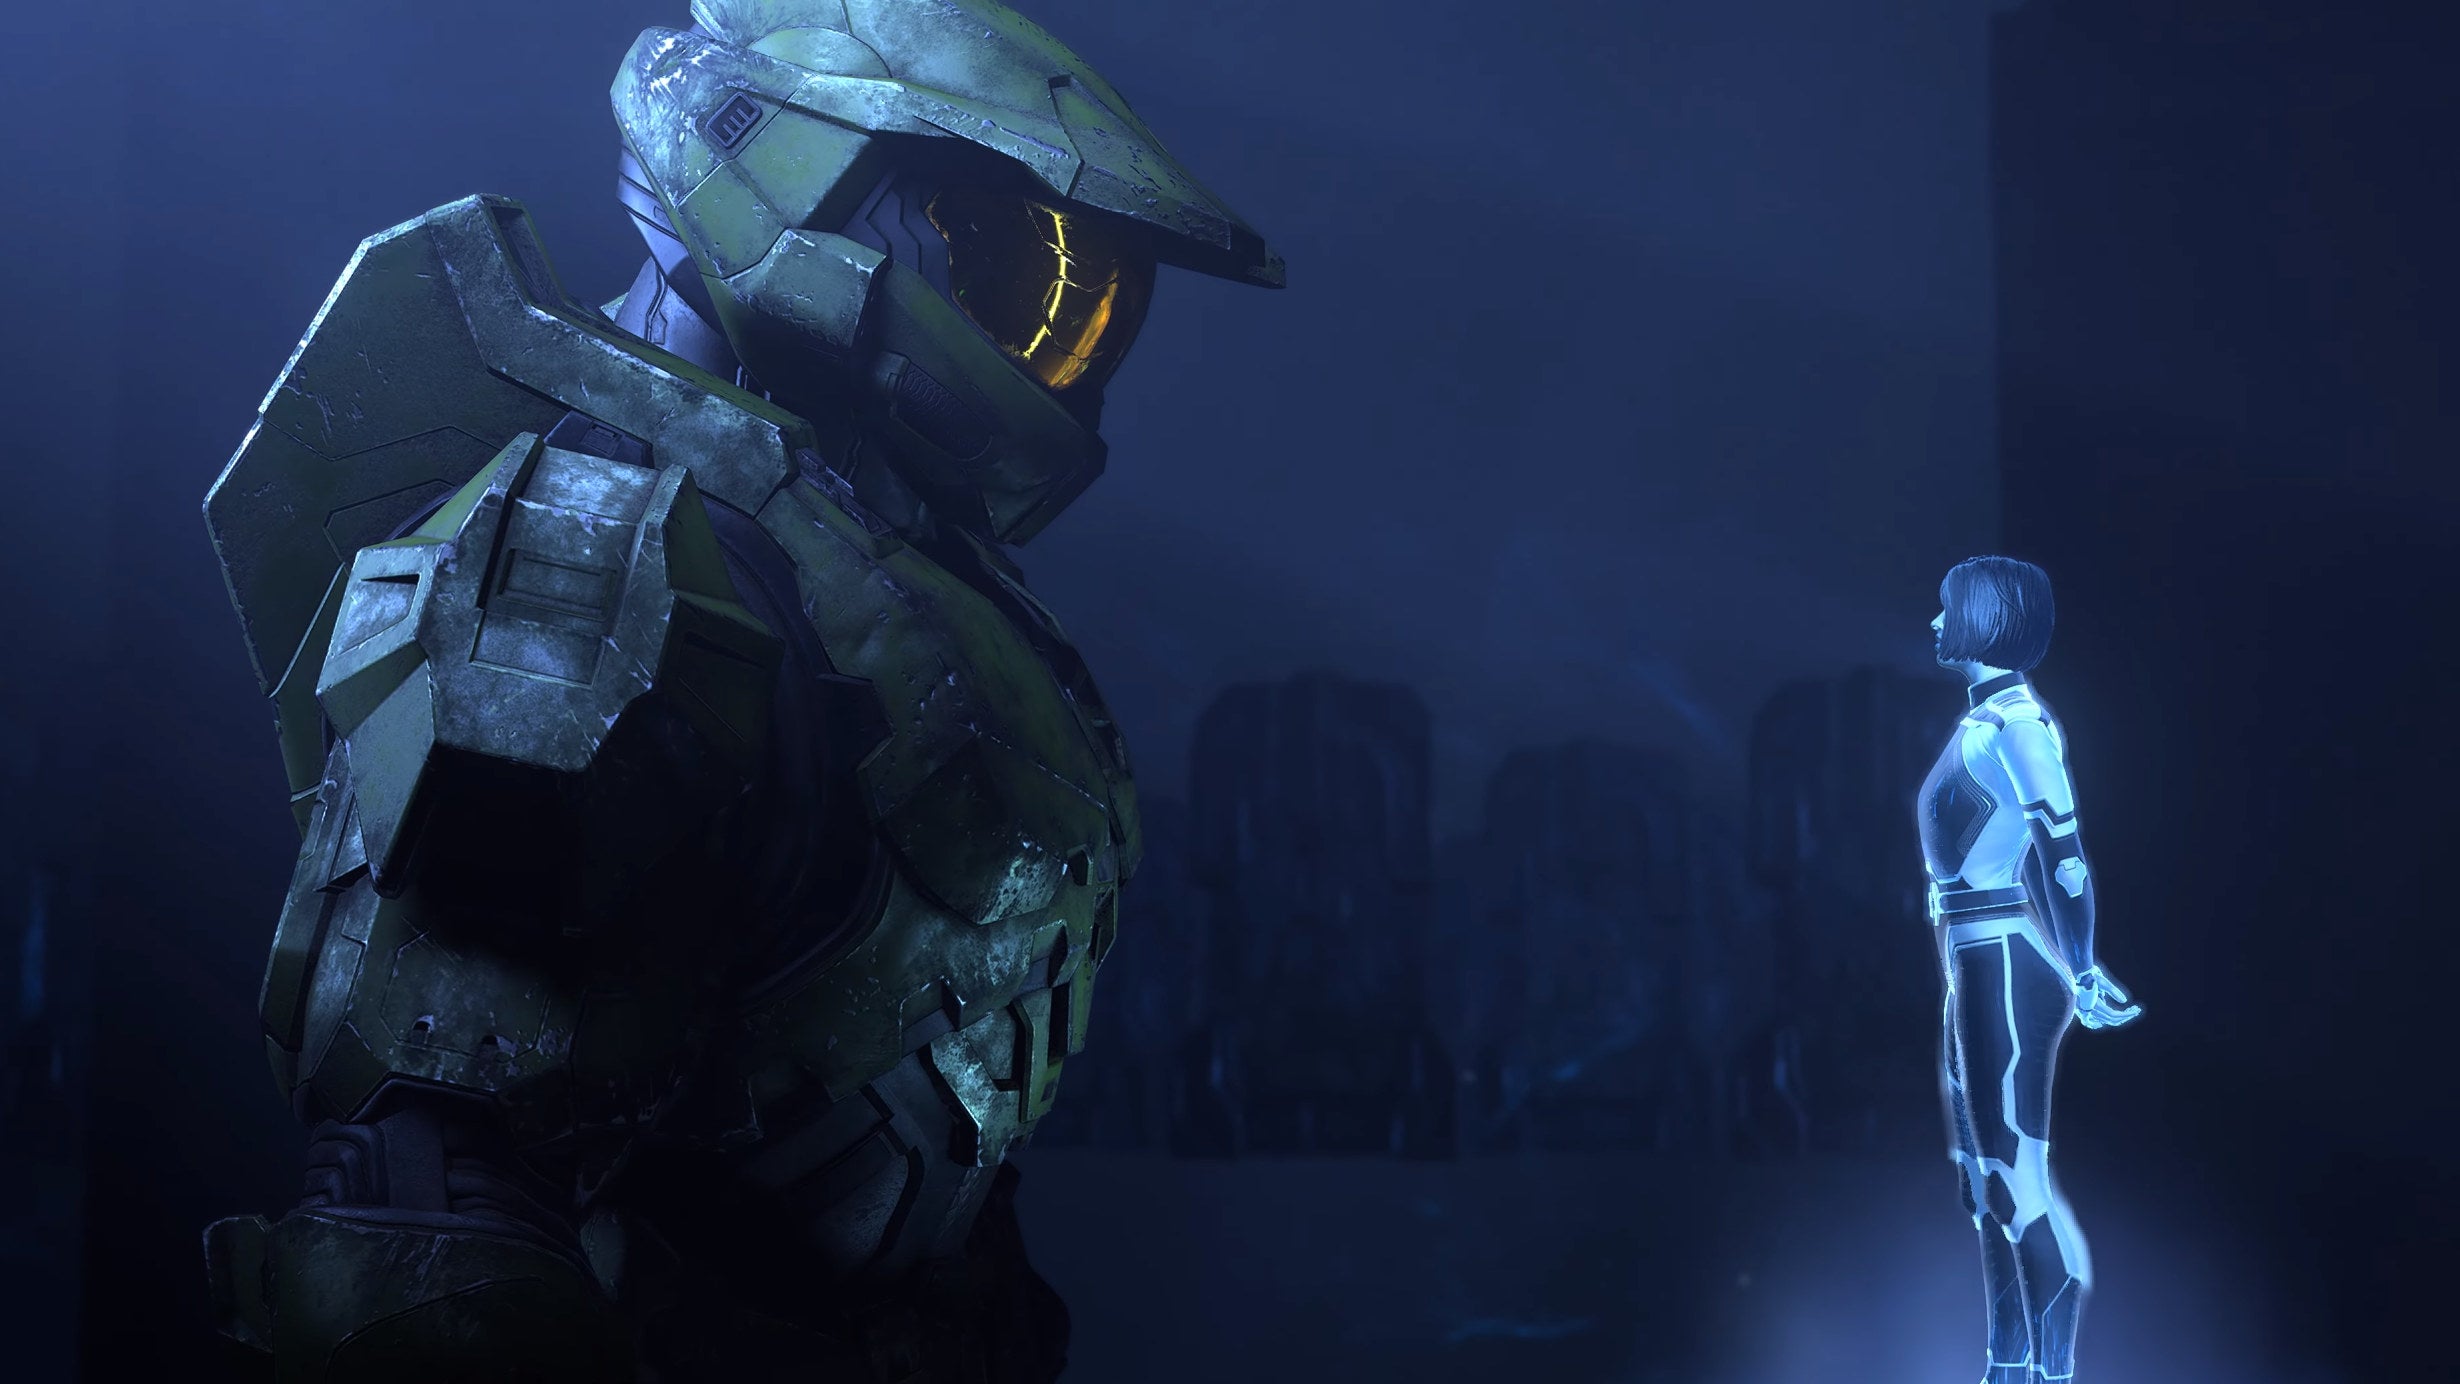 Master Chief and his new tamagotchi in a Halo Infinite screenshot.